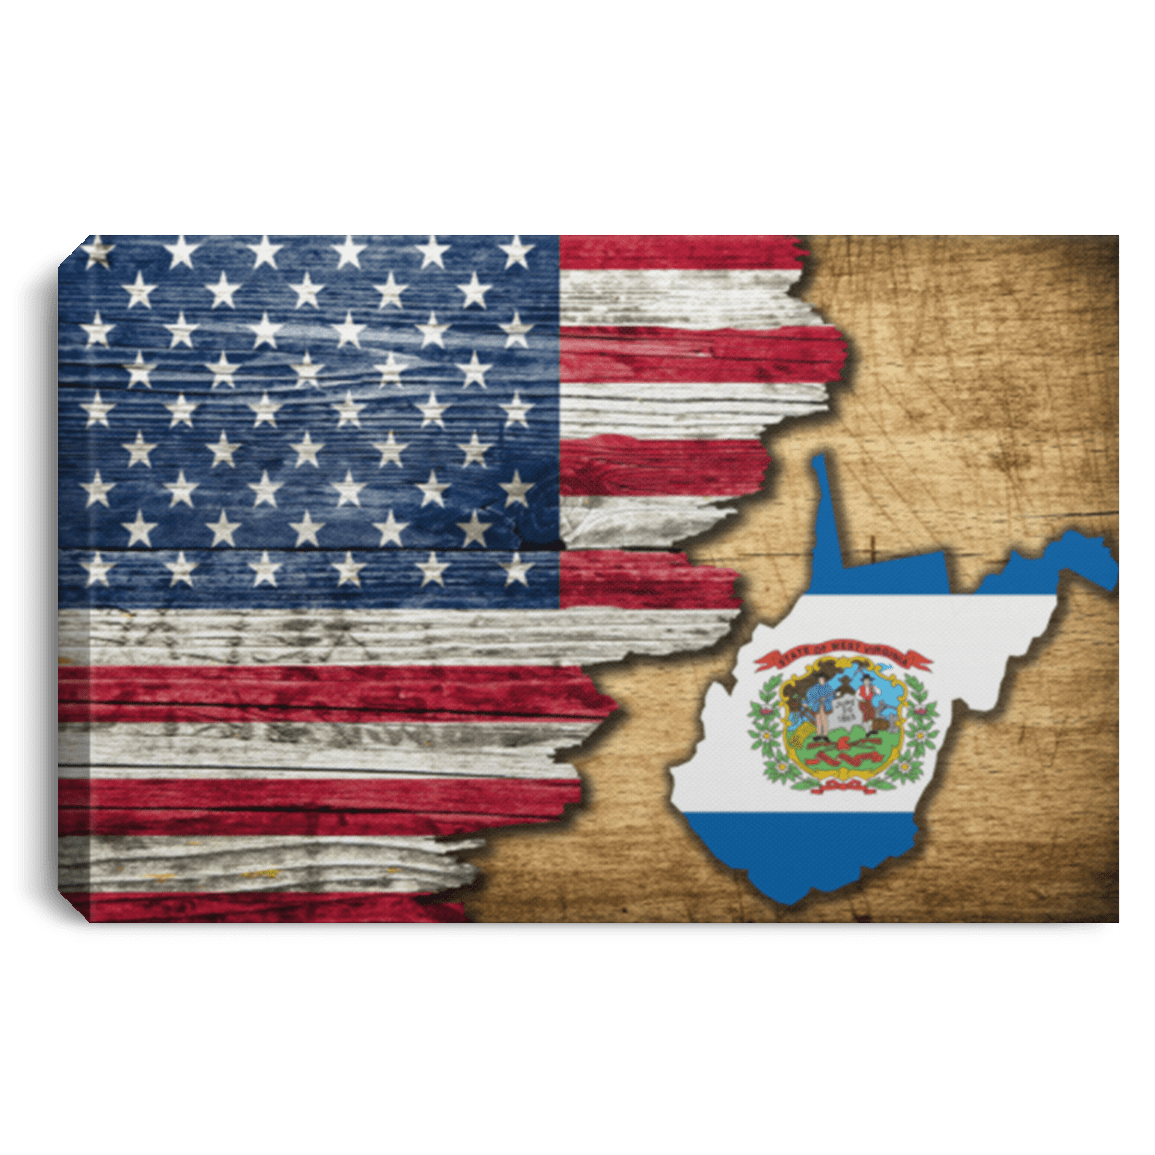 United States/West Virginia Flag Ripped Effect 18X12 Inches Landscape Canvas .75In Frame